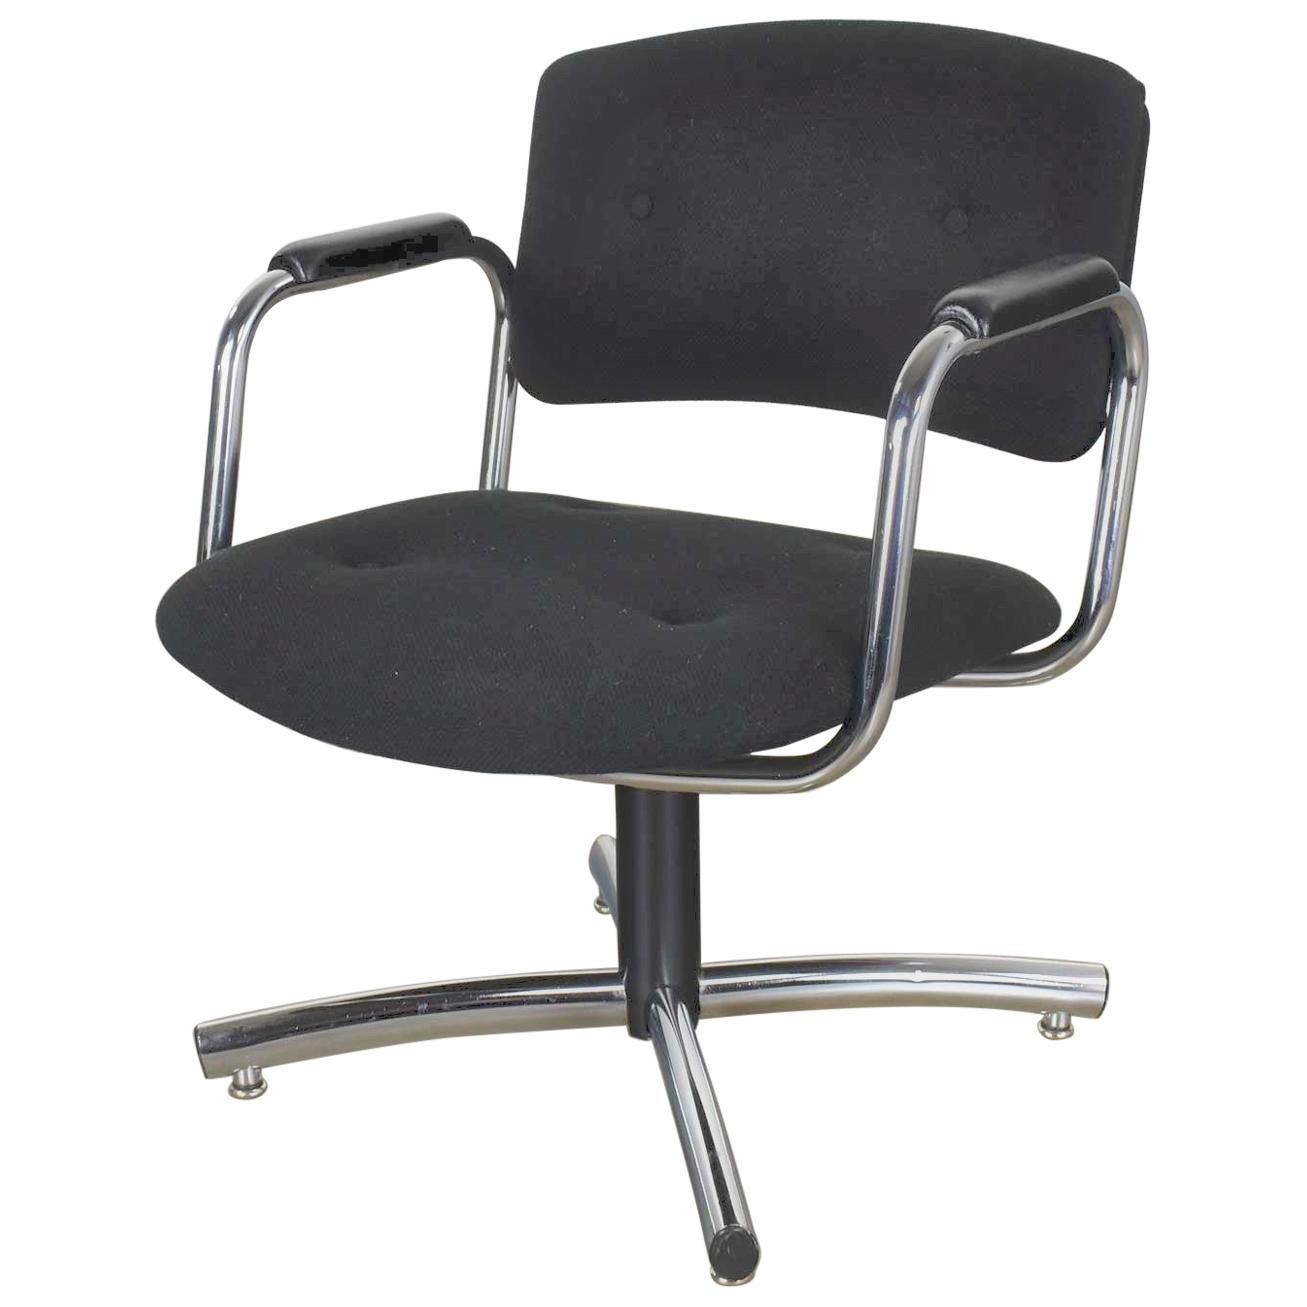 Vintage Modern Chrome & Black Office Armchair 4 Prong Base Style Steelcase, 1970